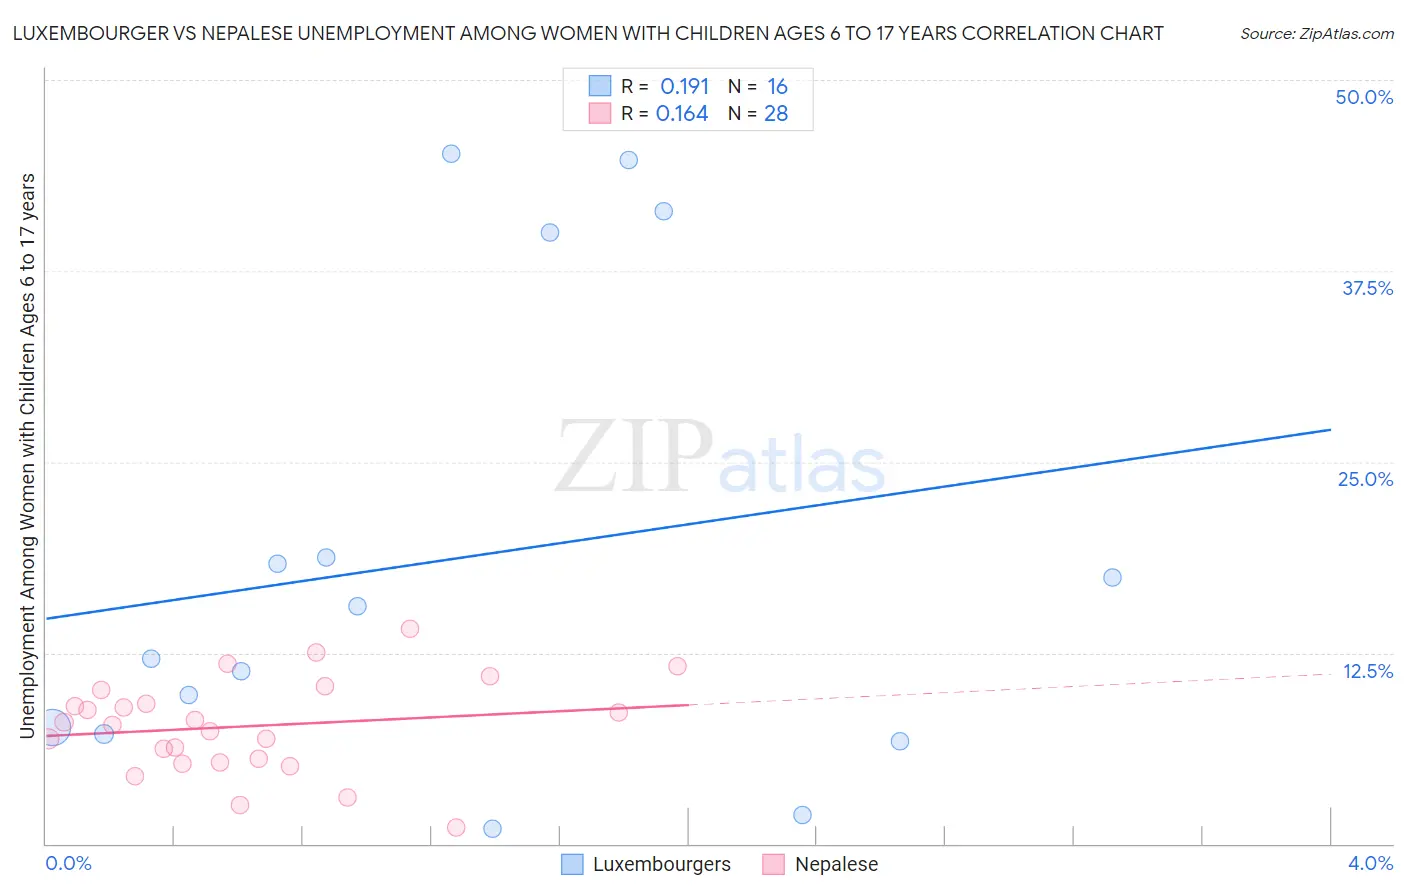 Luxembourger vs Nepalese Unemployment Among Women with Children Ages 6 to 17 years